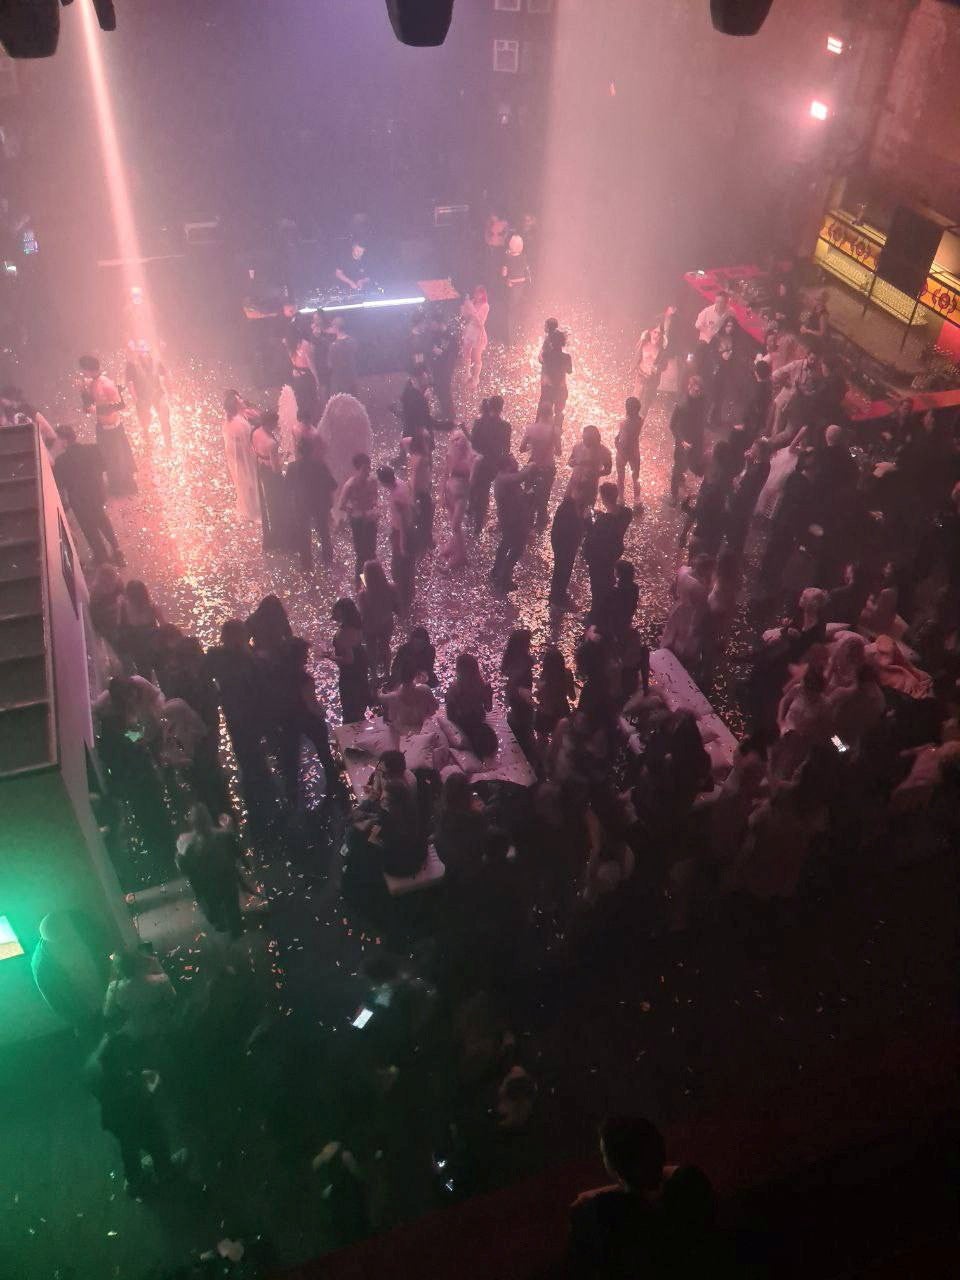 People attend an ‘almost naked’ party organized by Russian blogger Anastasia (Nastya) Ivleeva at Mutabor nightclub in Moscow